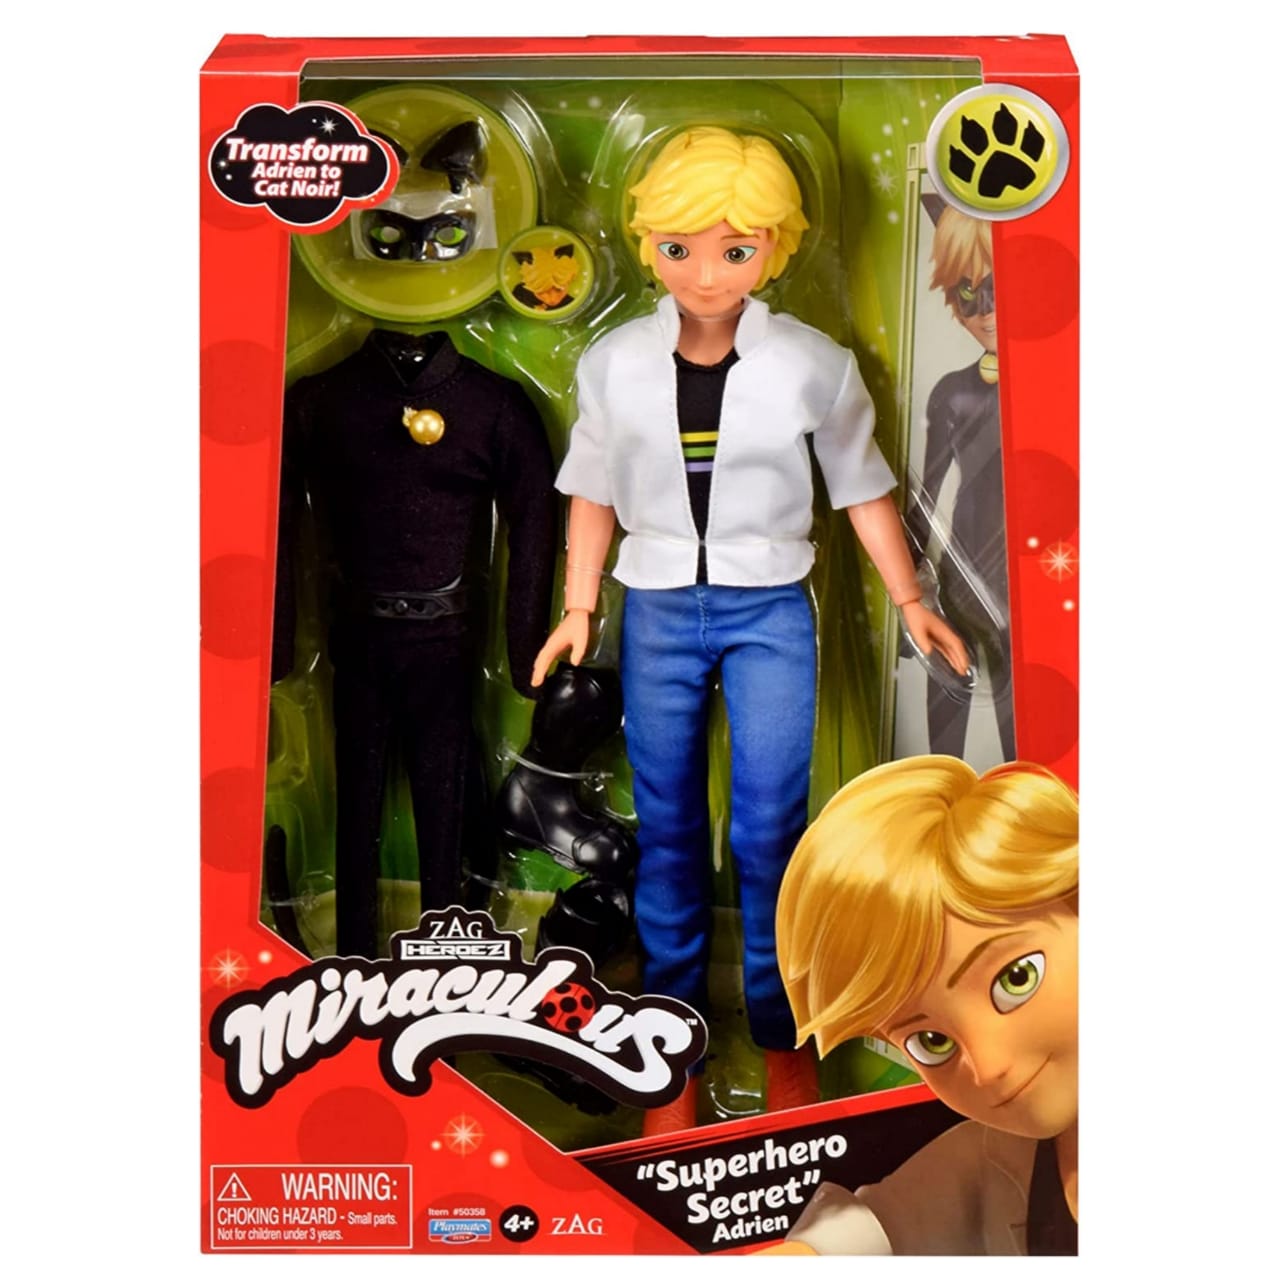 Miraculous: Tales of Ladybug & Cat Noir Toys Are Heading to the U.S. - The  Toy Book